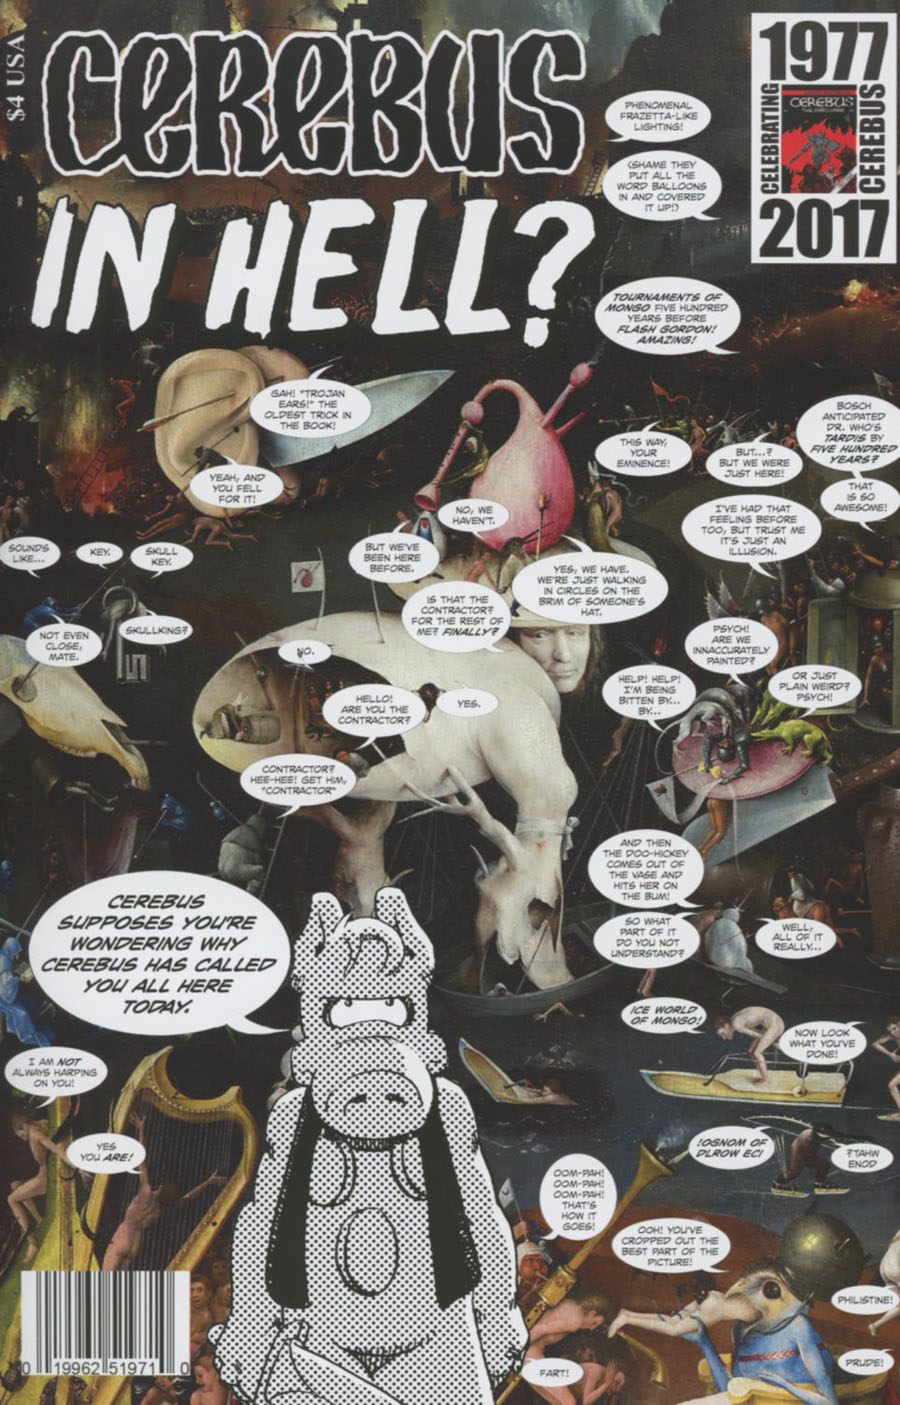 Cerebus In Hell #0